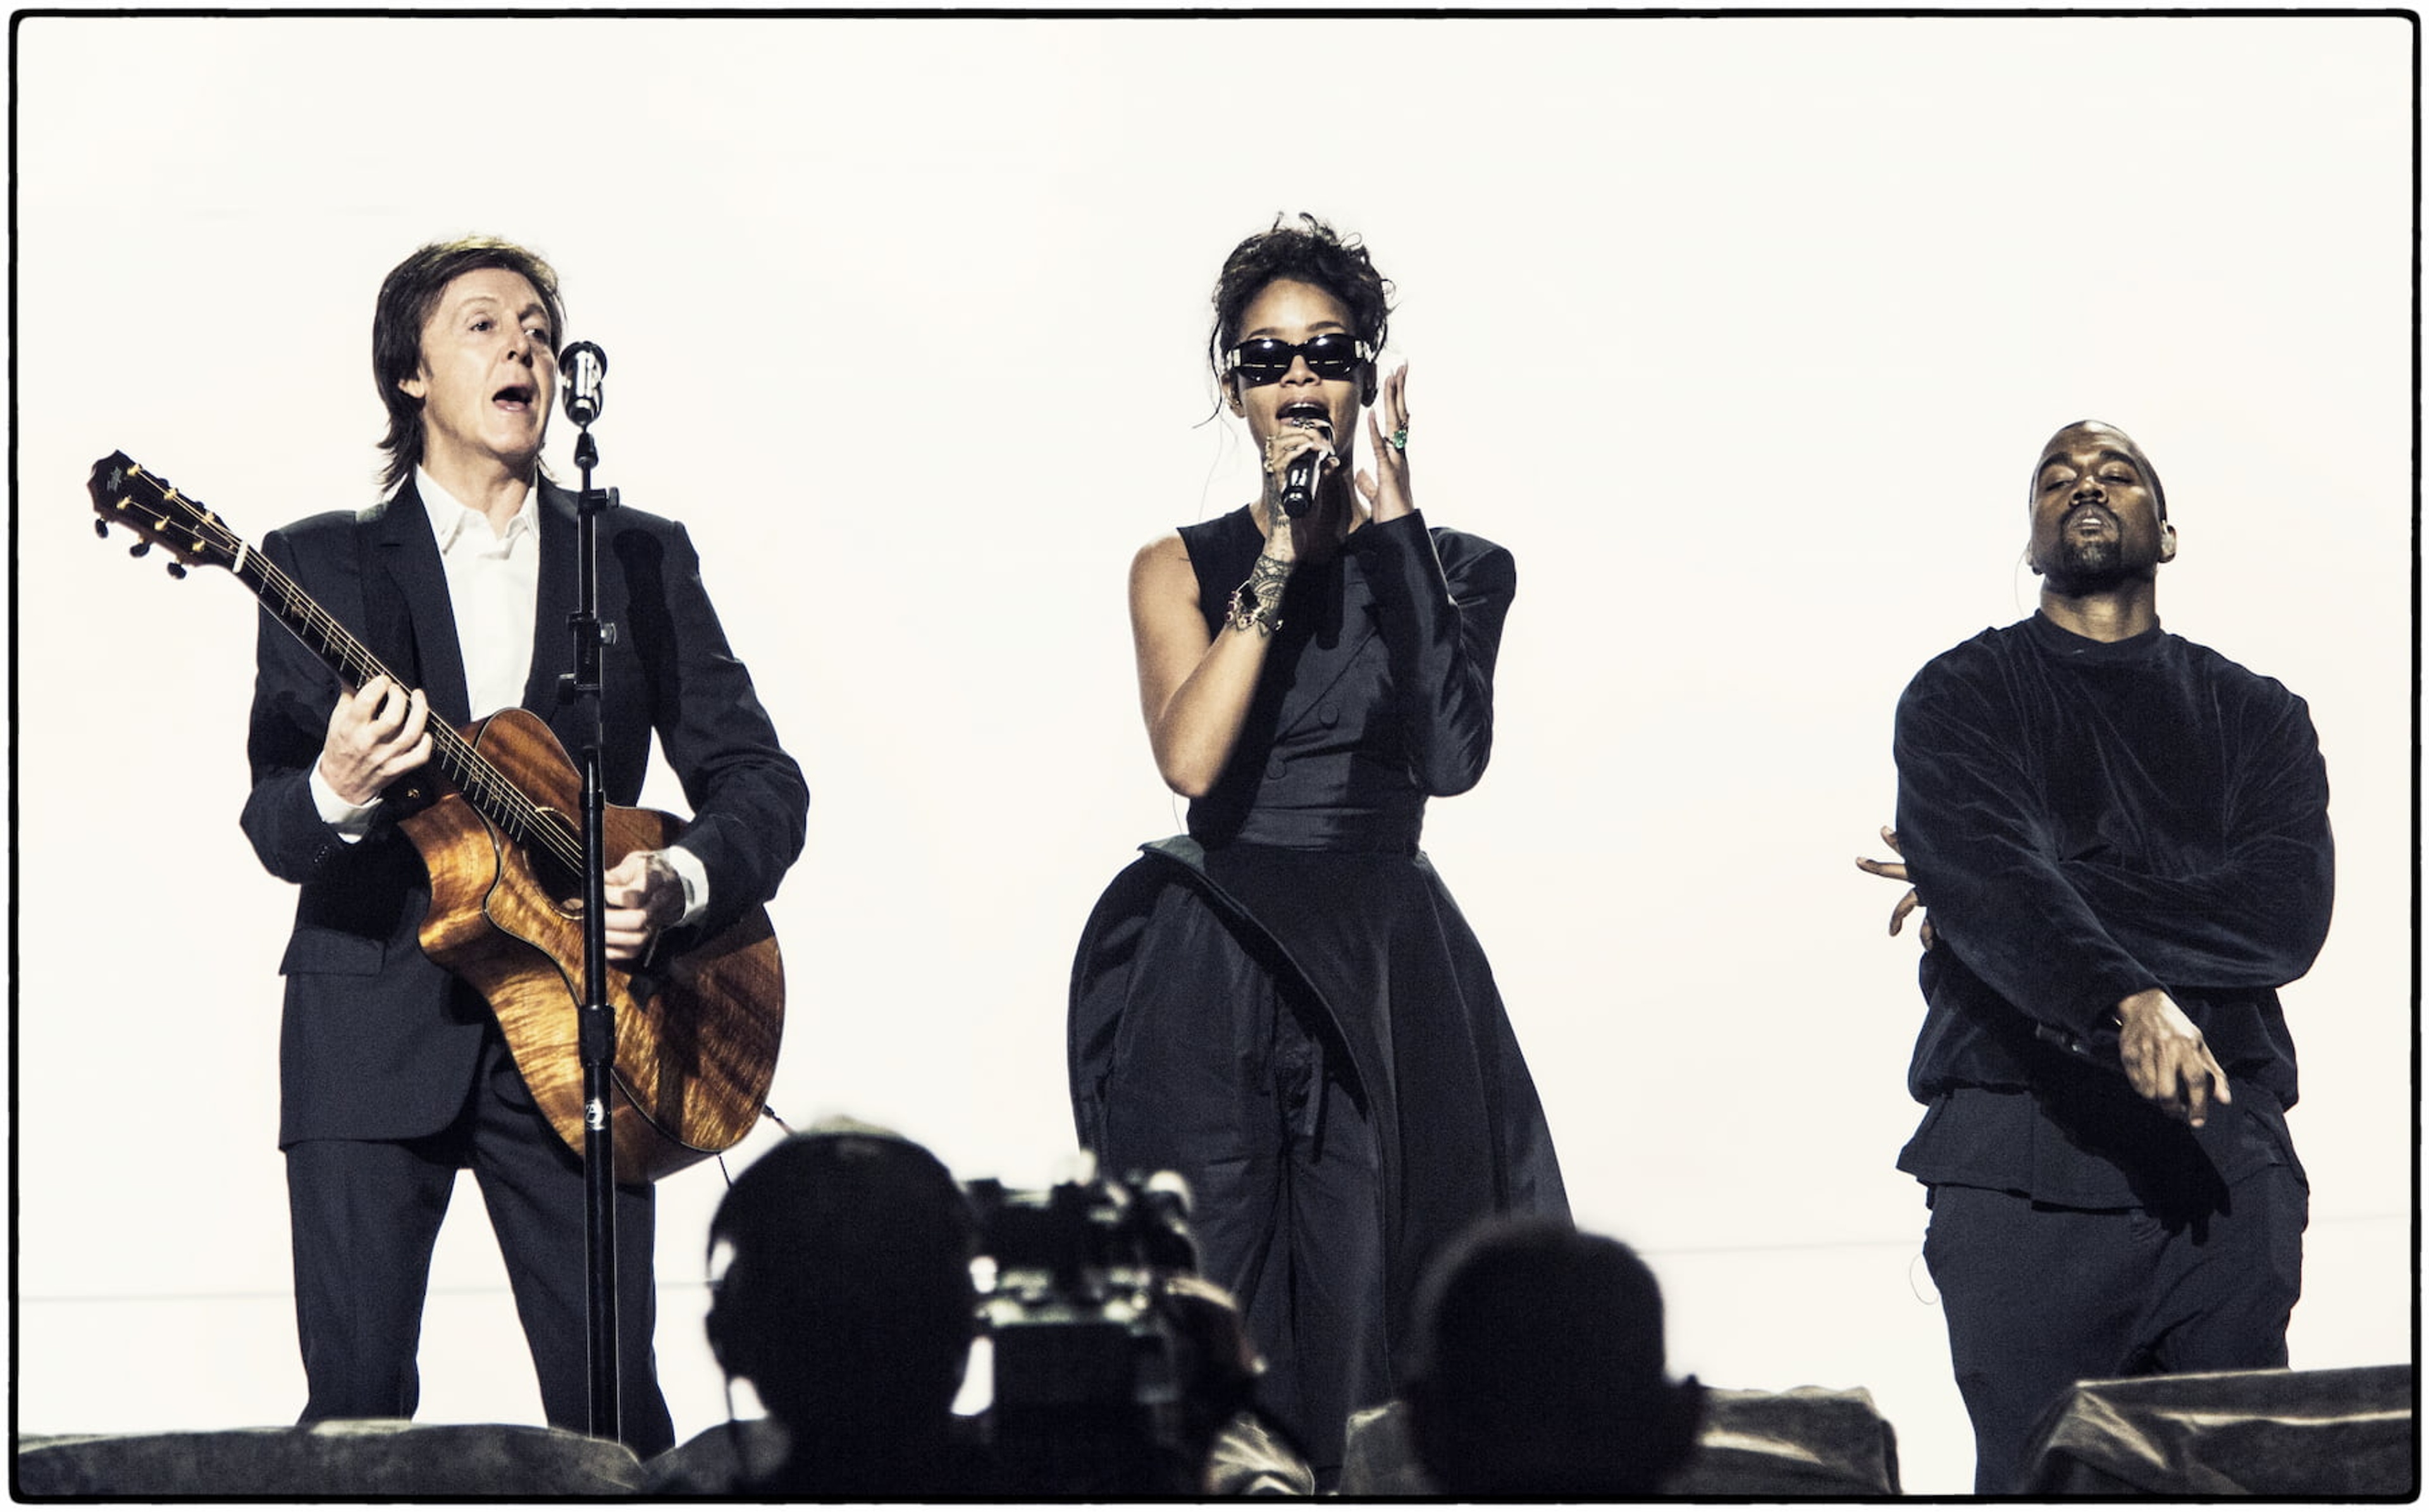 Photo of Paul McCartney on Guitar with Rihanna and Kanye West performing 'FourFiveSeconds' at the GRAMMY Awards.